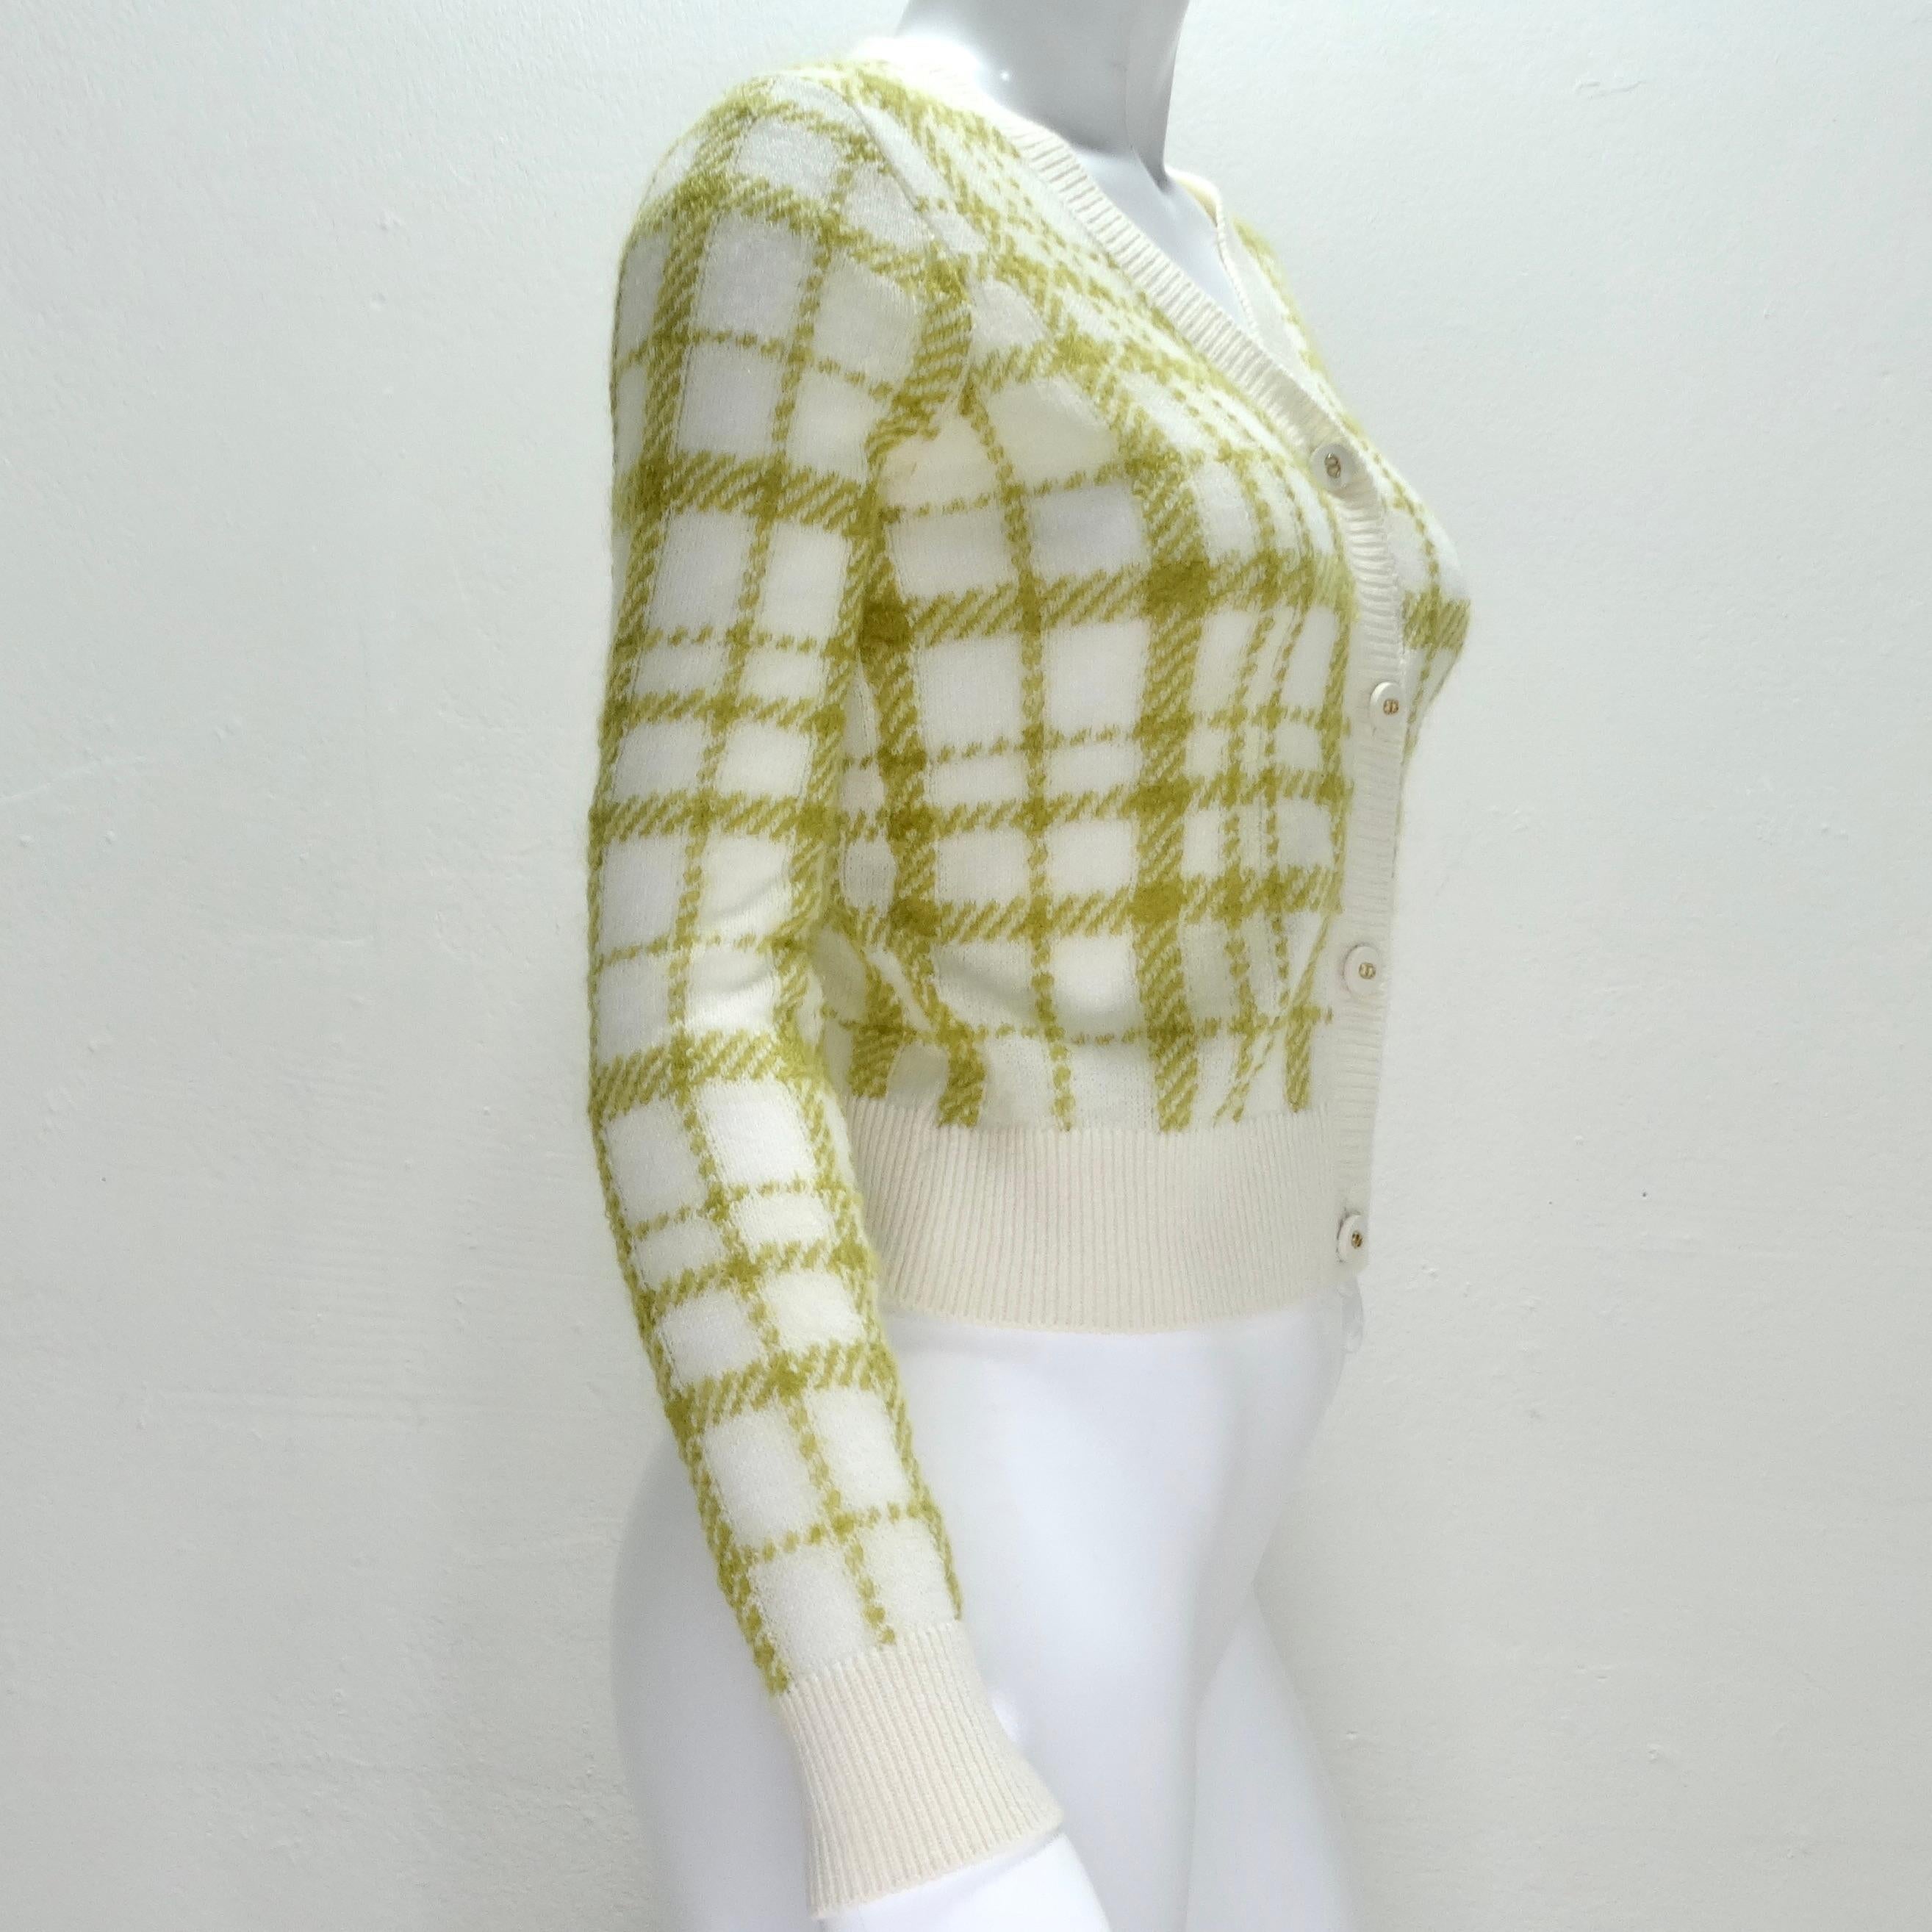 Christian Dior 2021 Plaid Wool Cardigan In Excellent Condition For Sale In Scottsdale, AZ